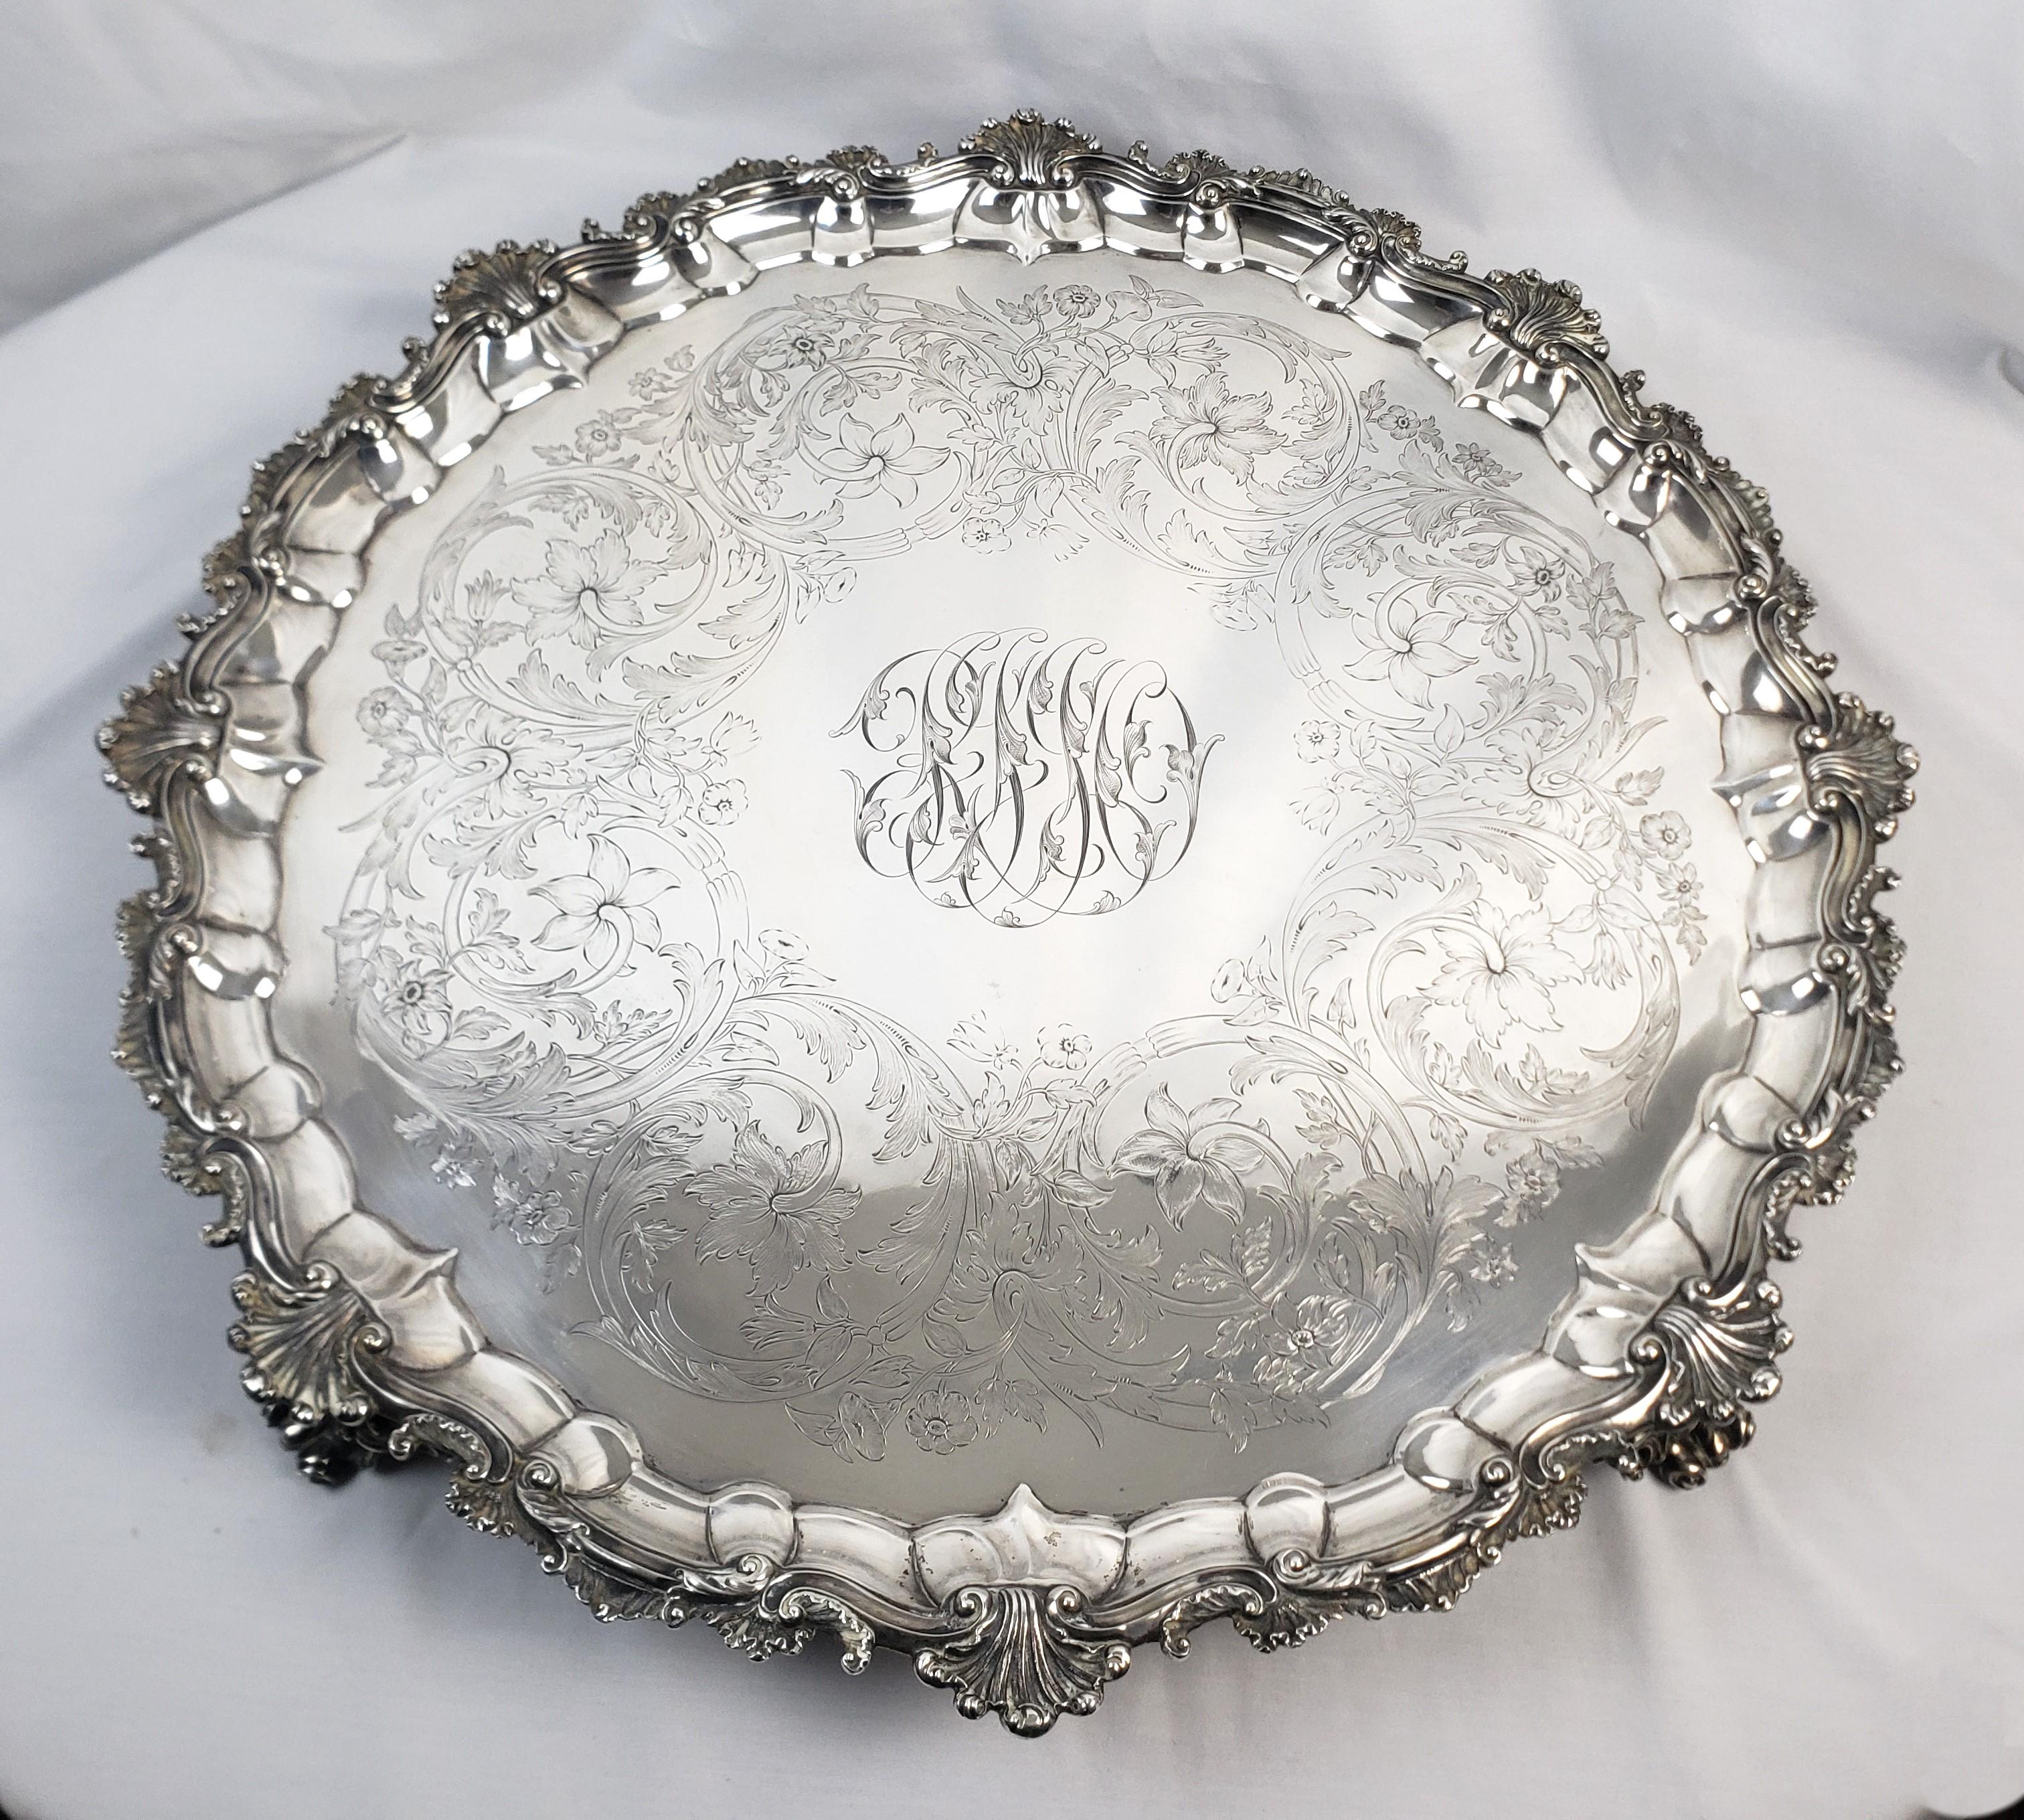 Hand-Crafted Huge Antique Sterling Silver Salver or Footed Tray with Ornate Floral Engraving For Sale